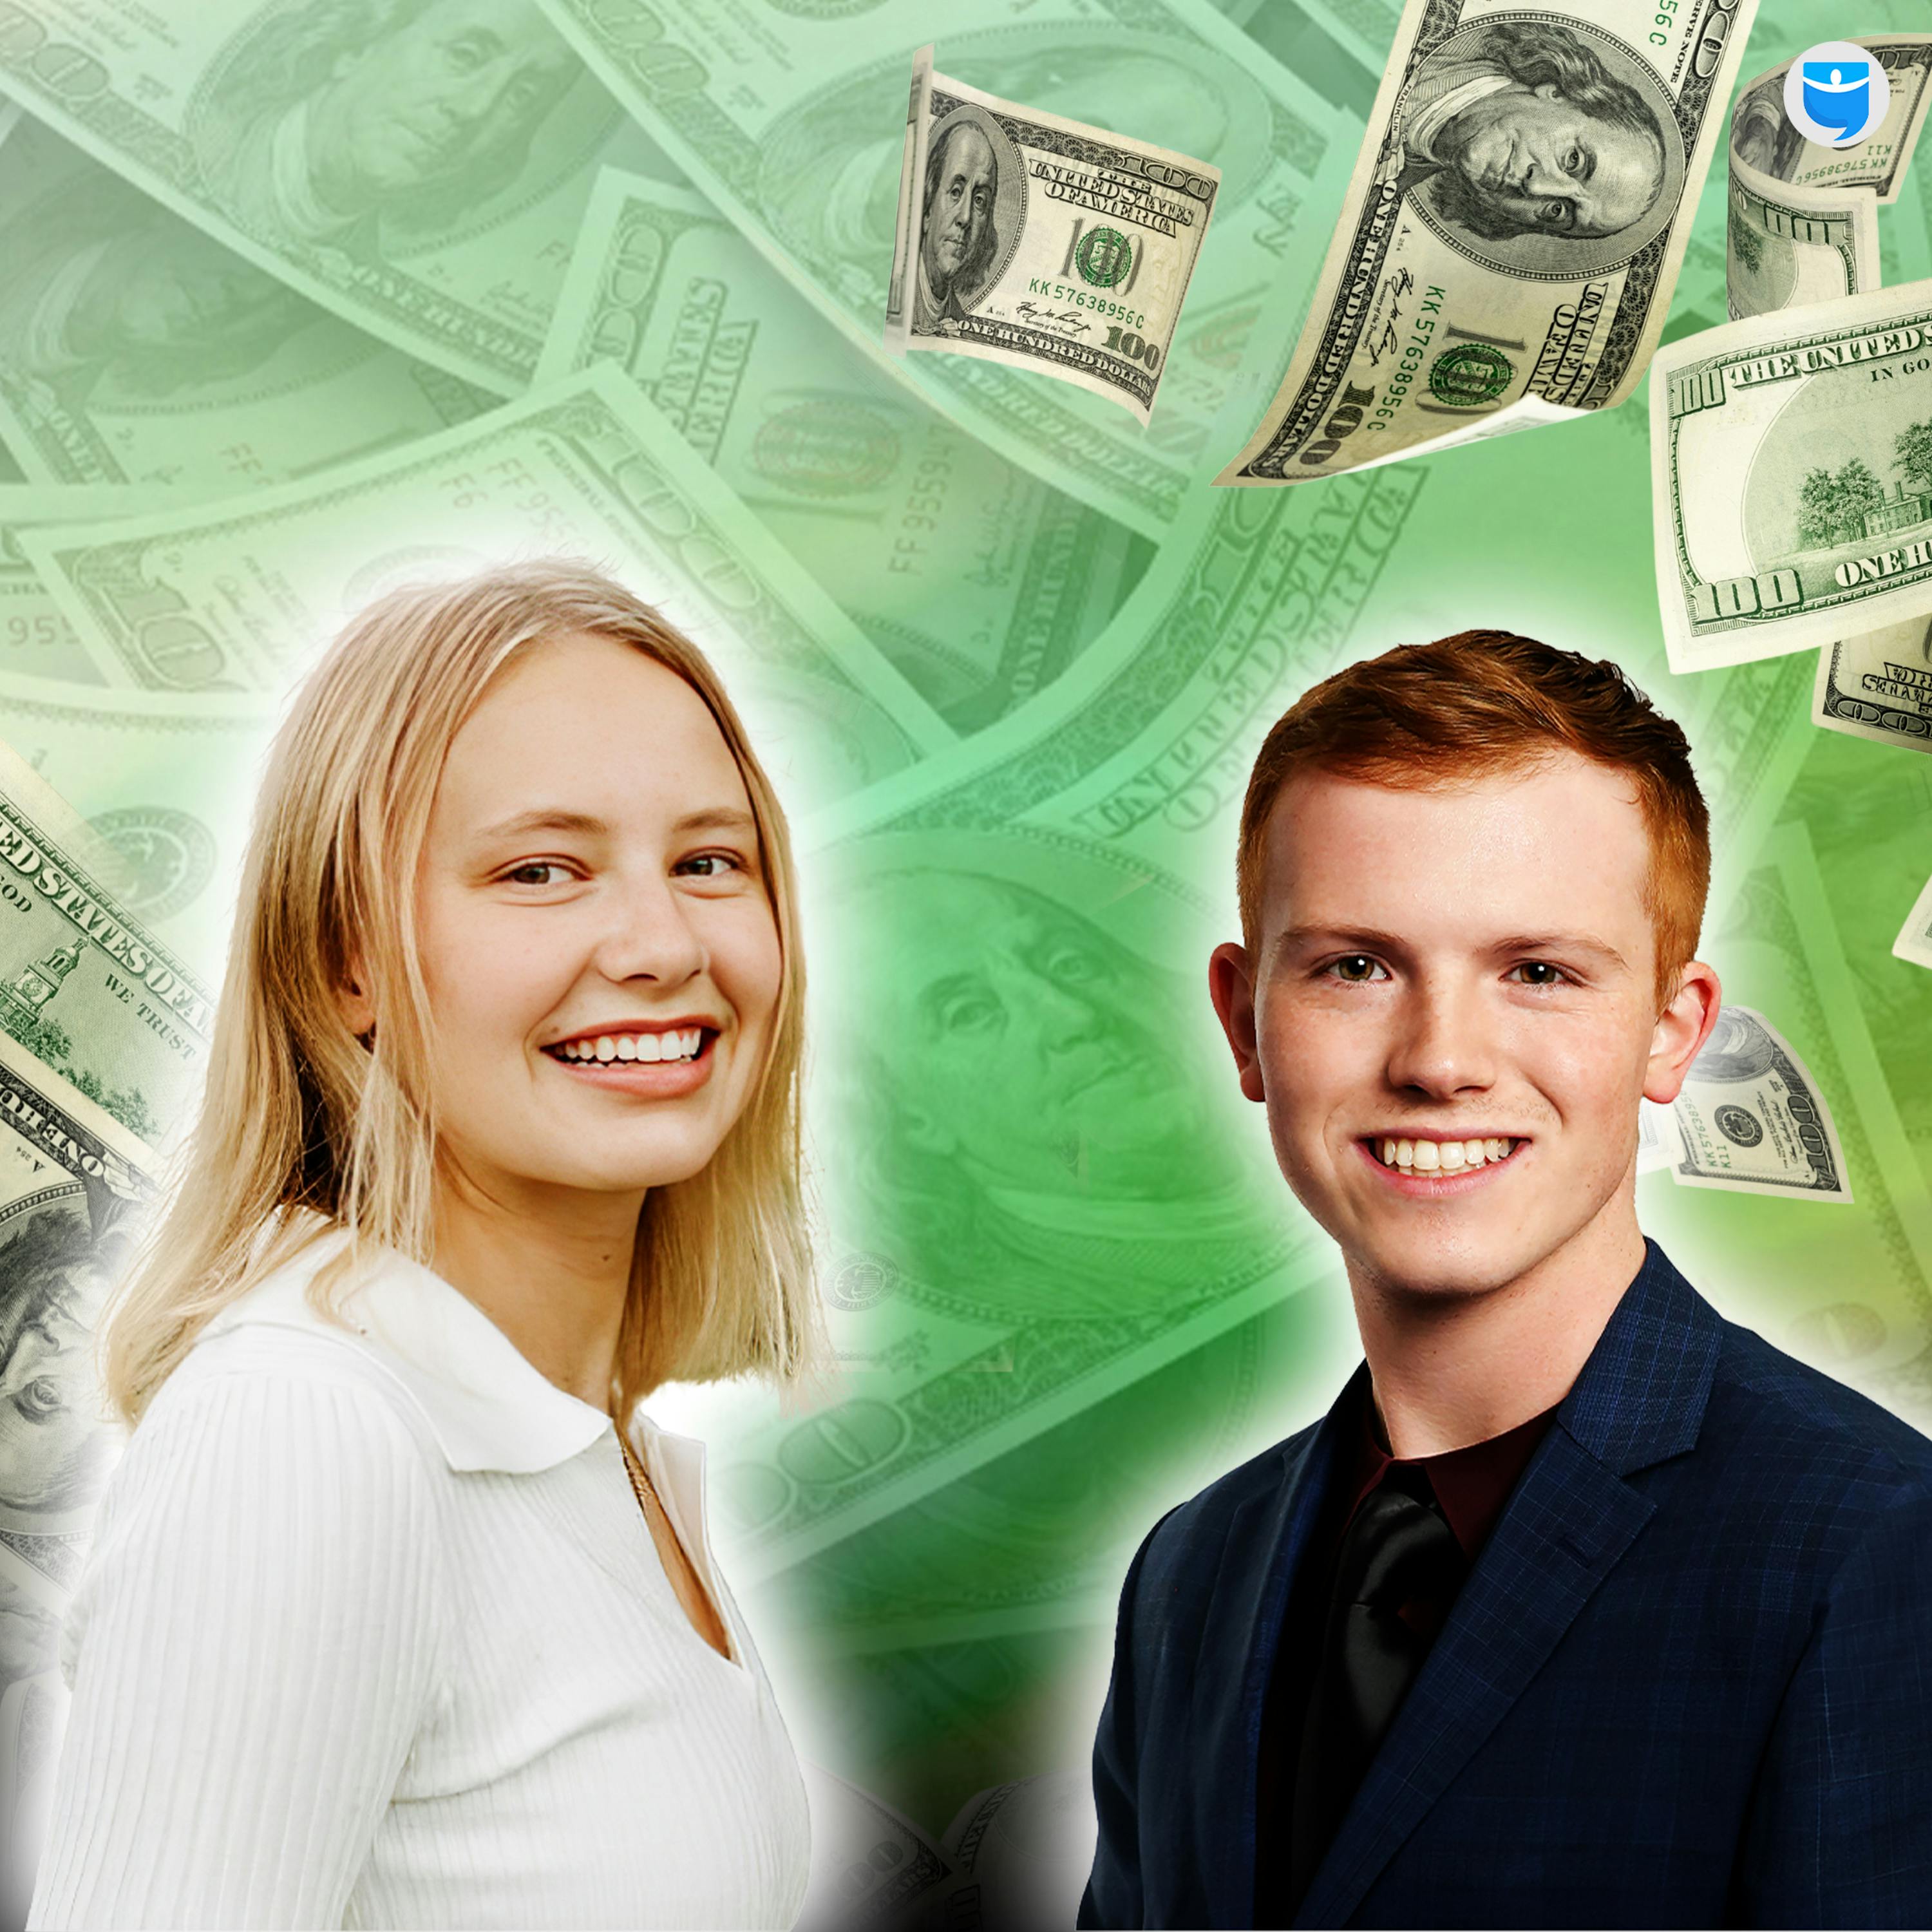 480: The Millionaire Fast-Track: How to Hit Financial Freedom Before 30